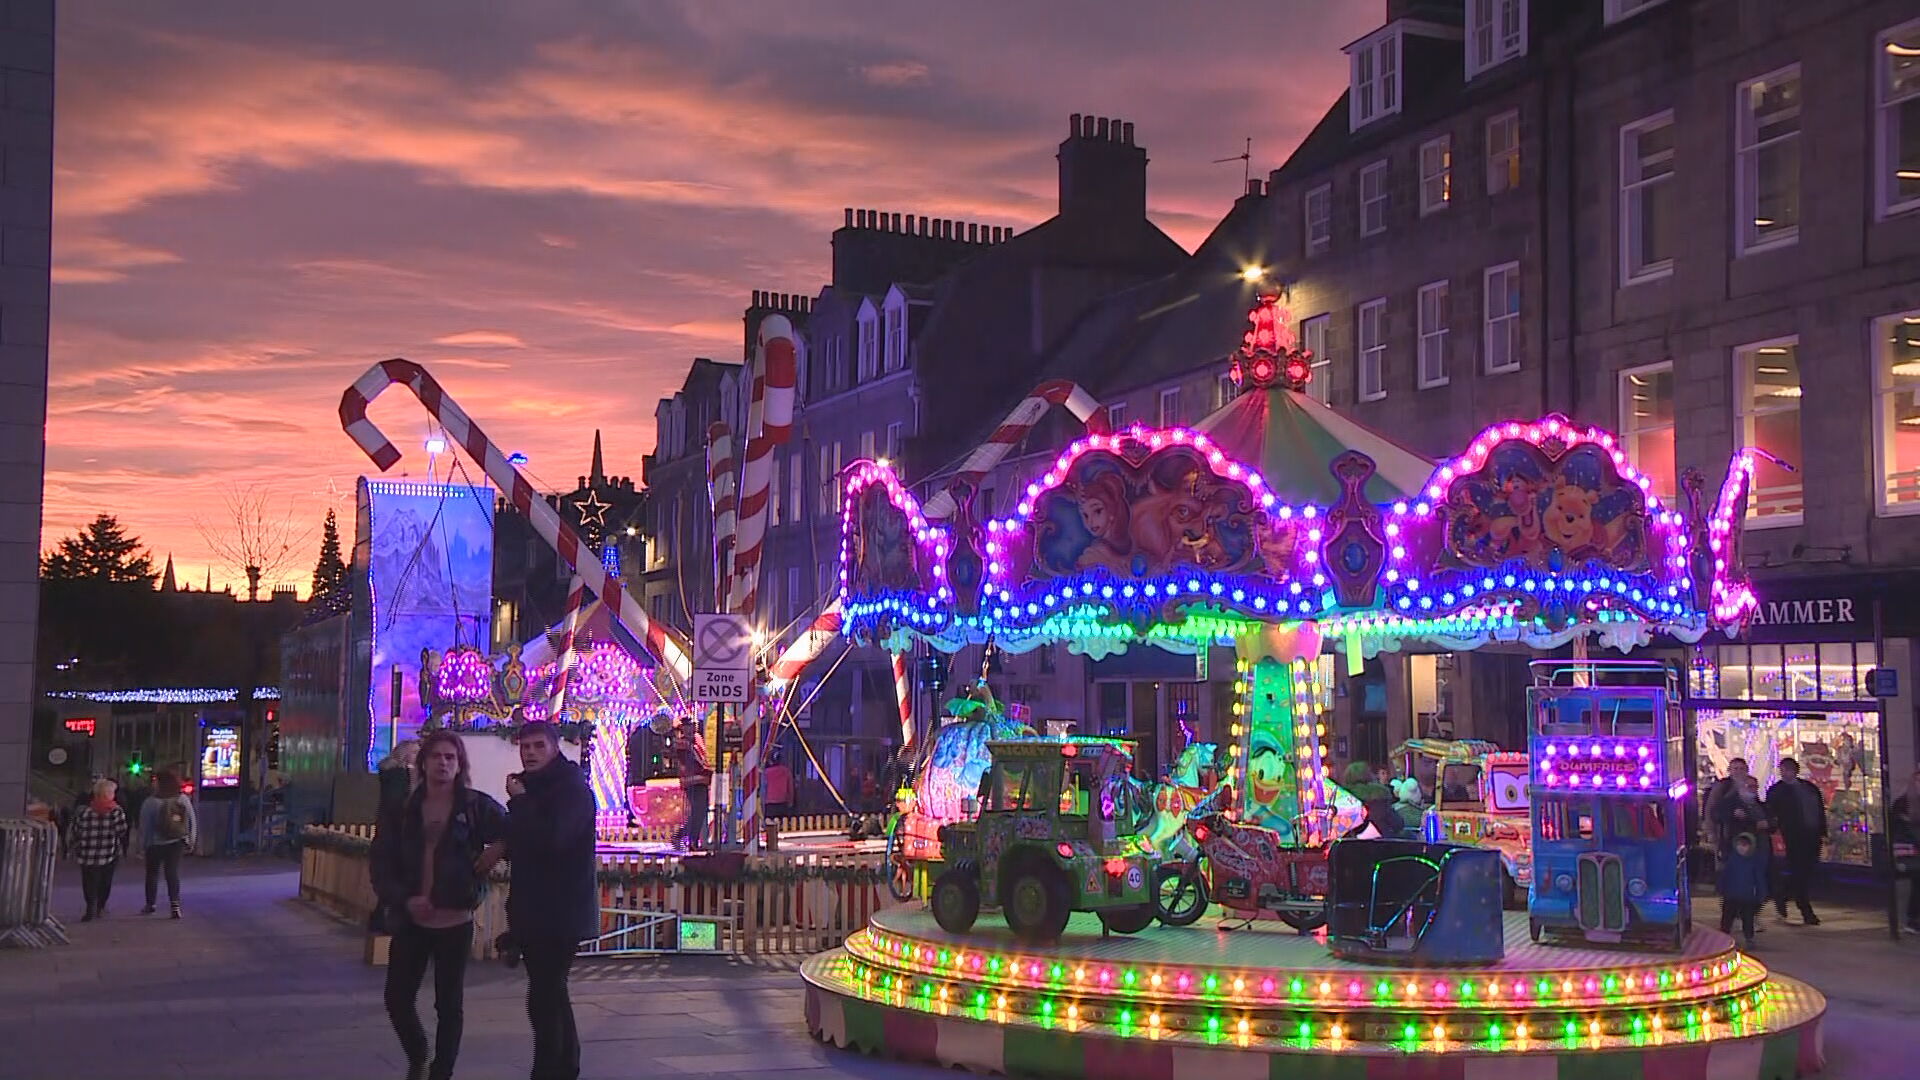 Aberdeen's Christmas village will feature a new Village Square this year